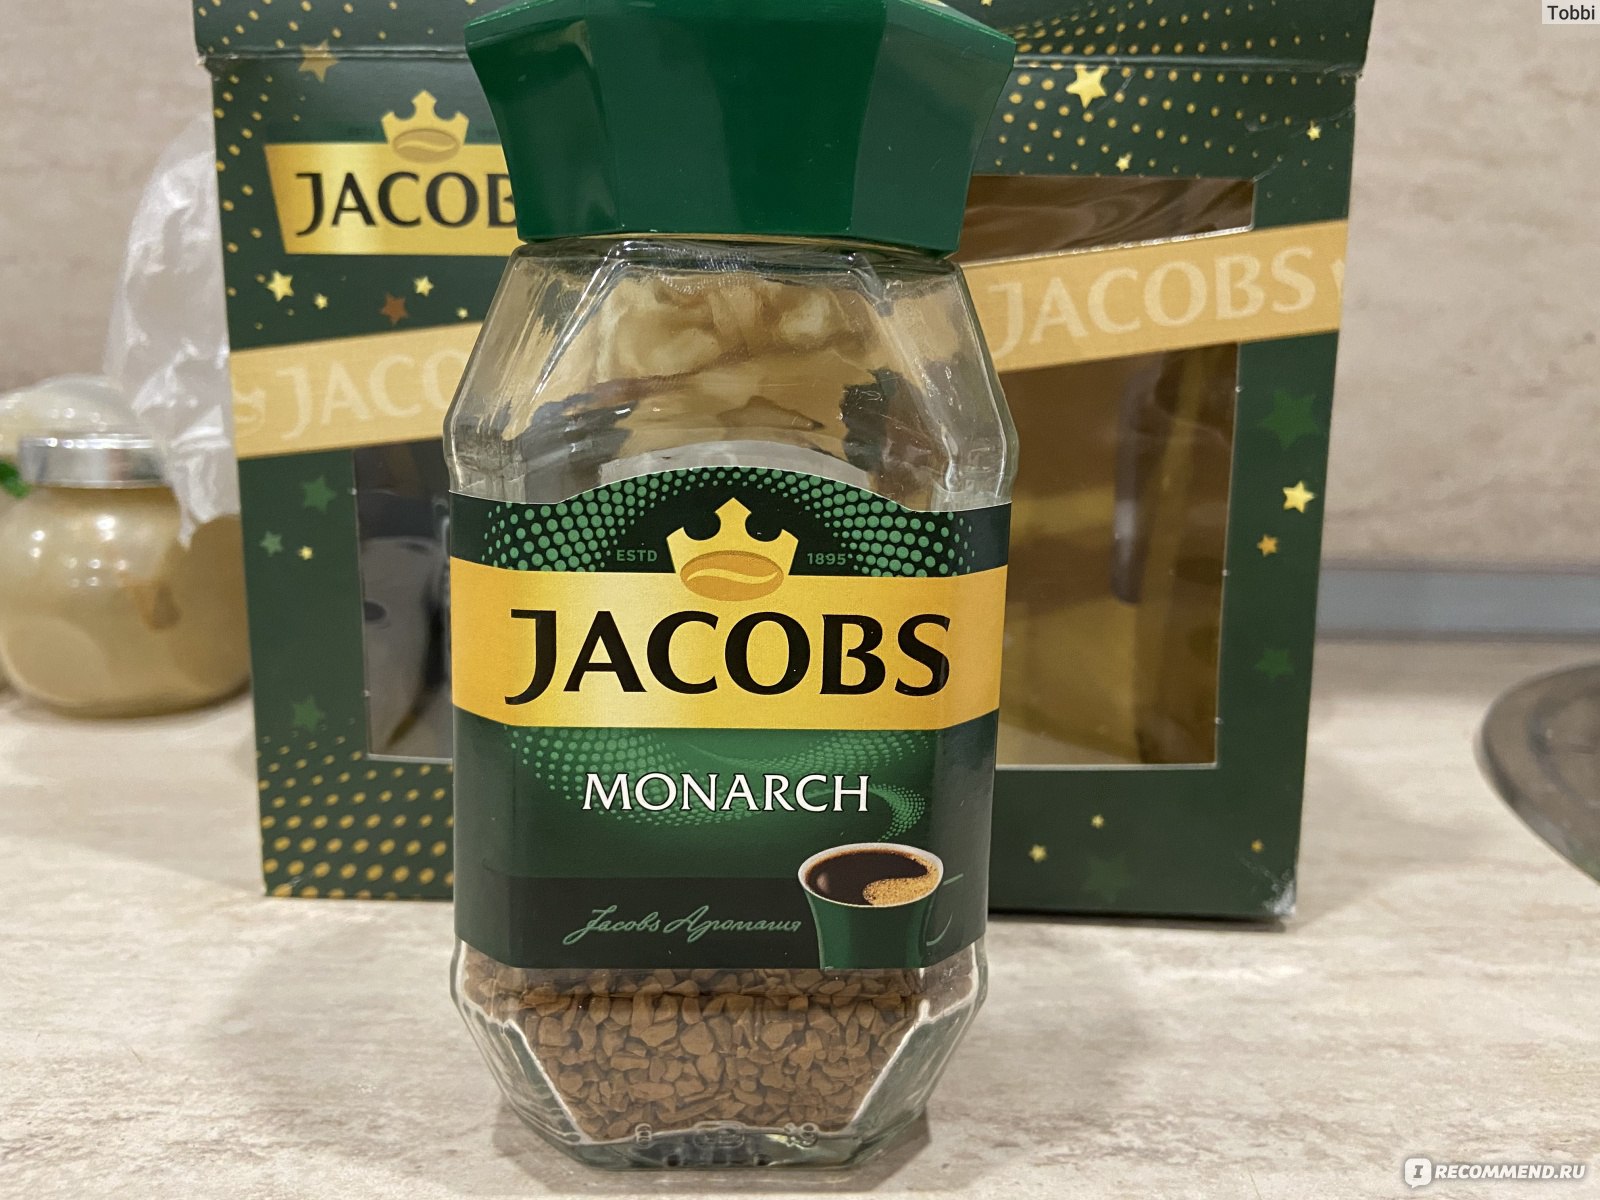 Jacobs Monarch ackaking